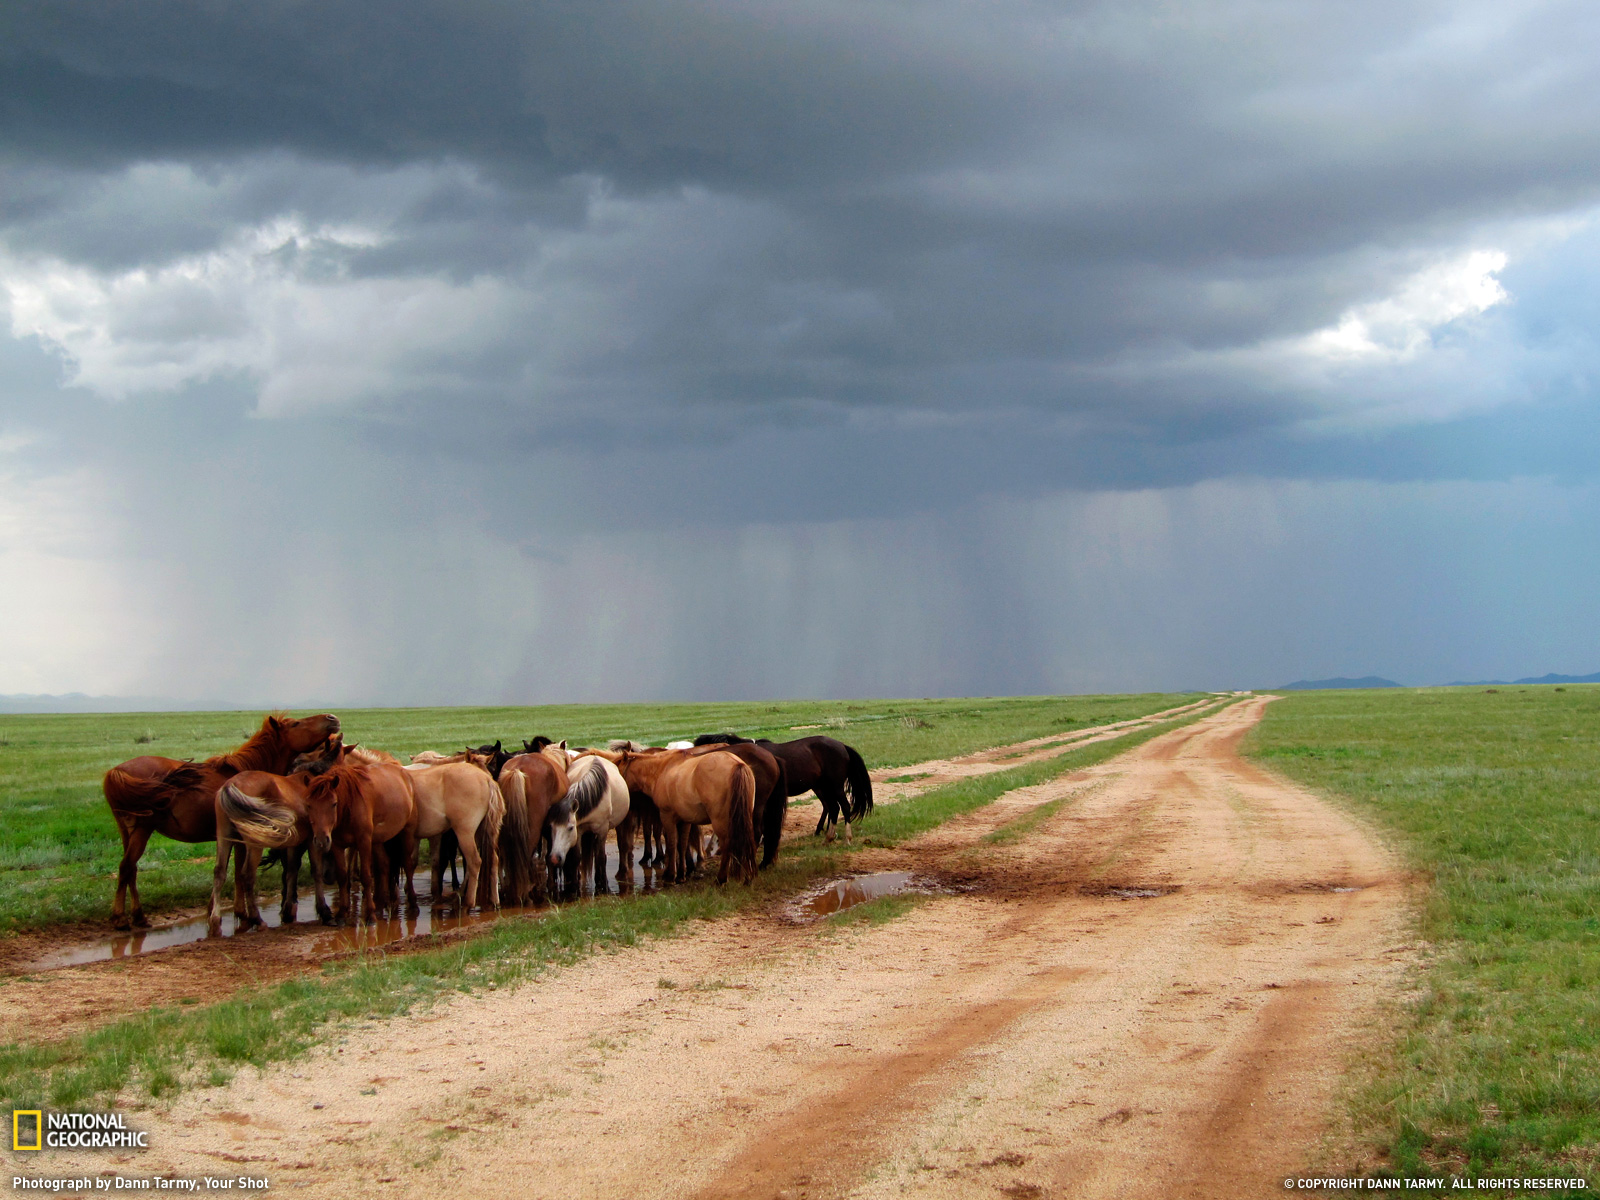 Ponies Mongolia National Geographic Daily Photo